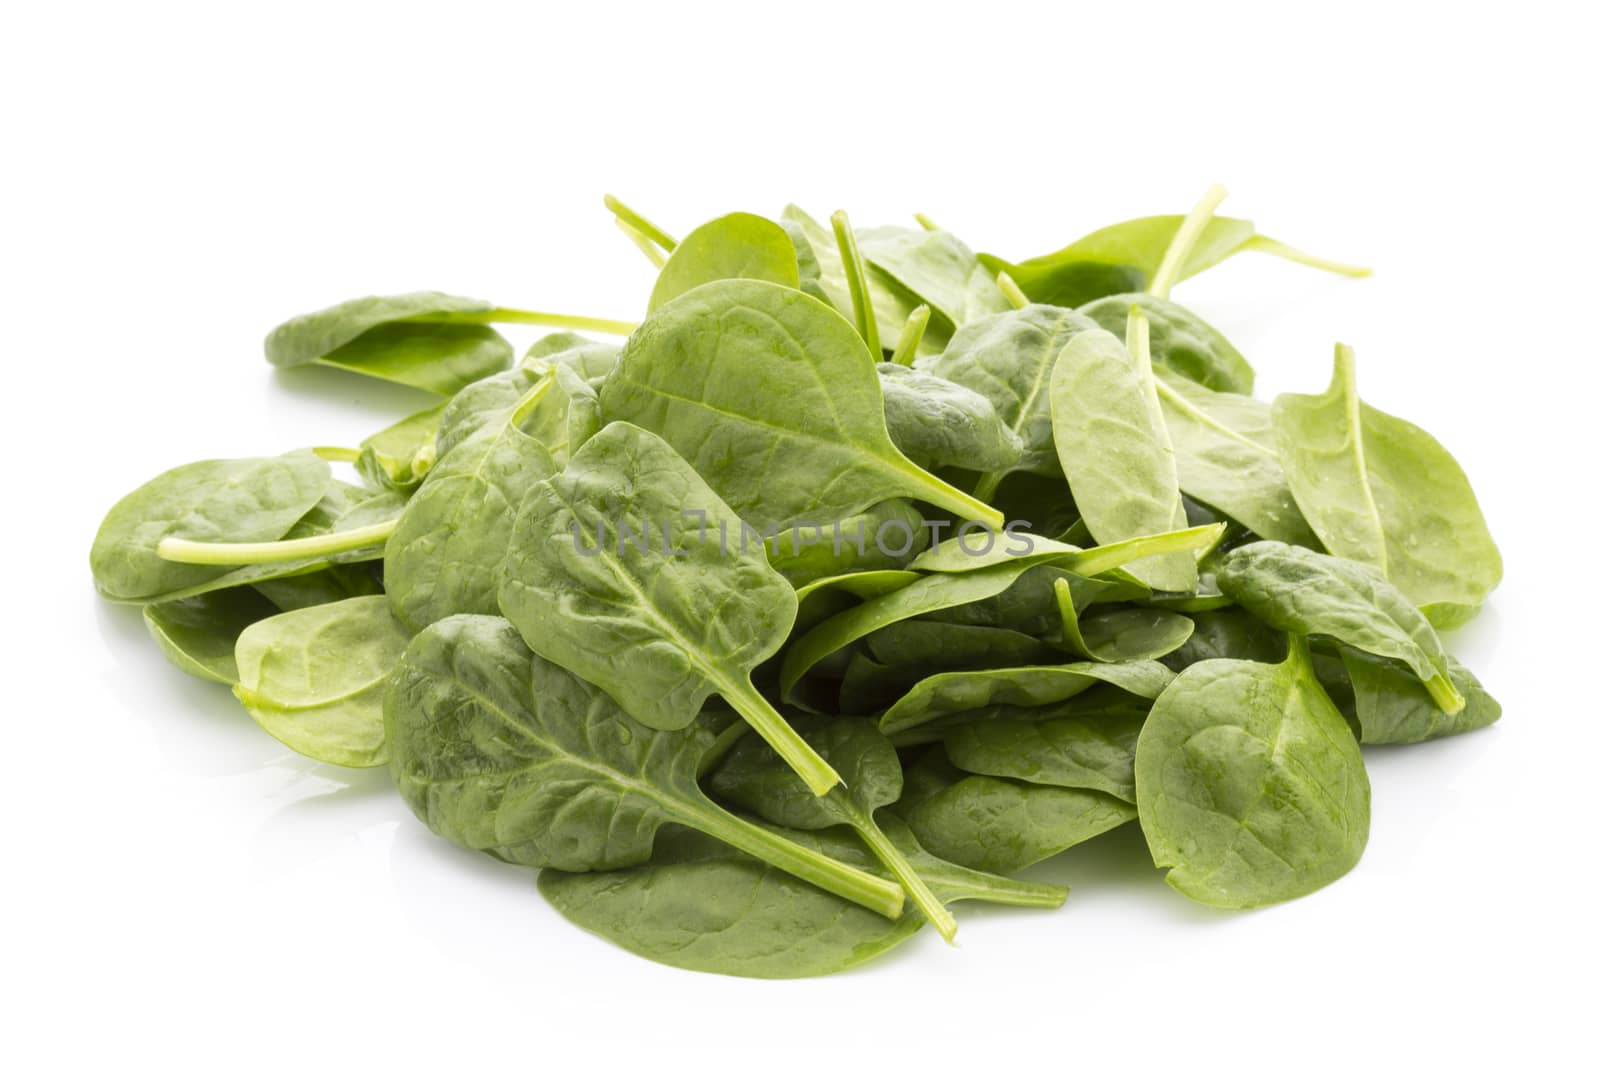 Spinach isolated on the white background.